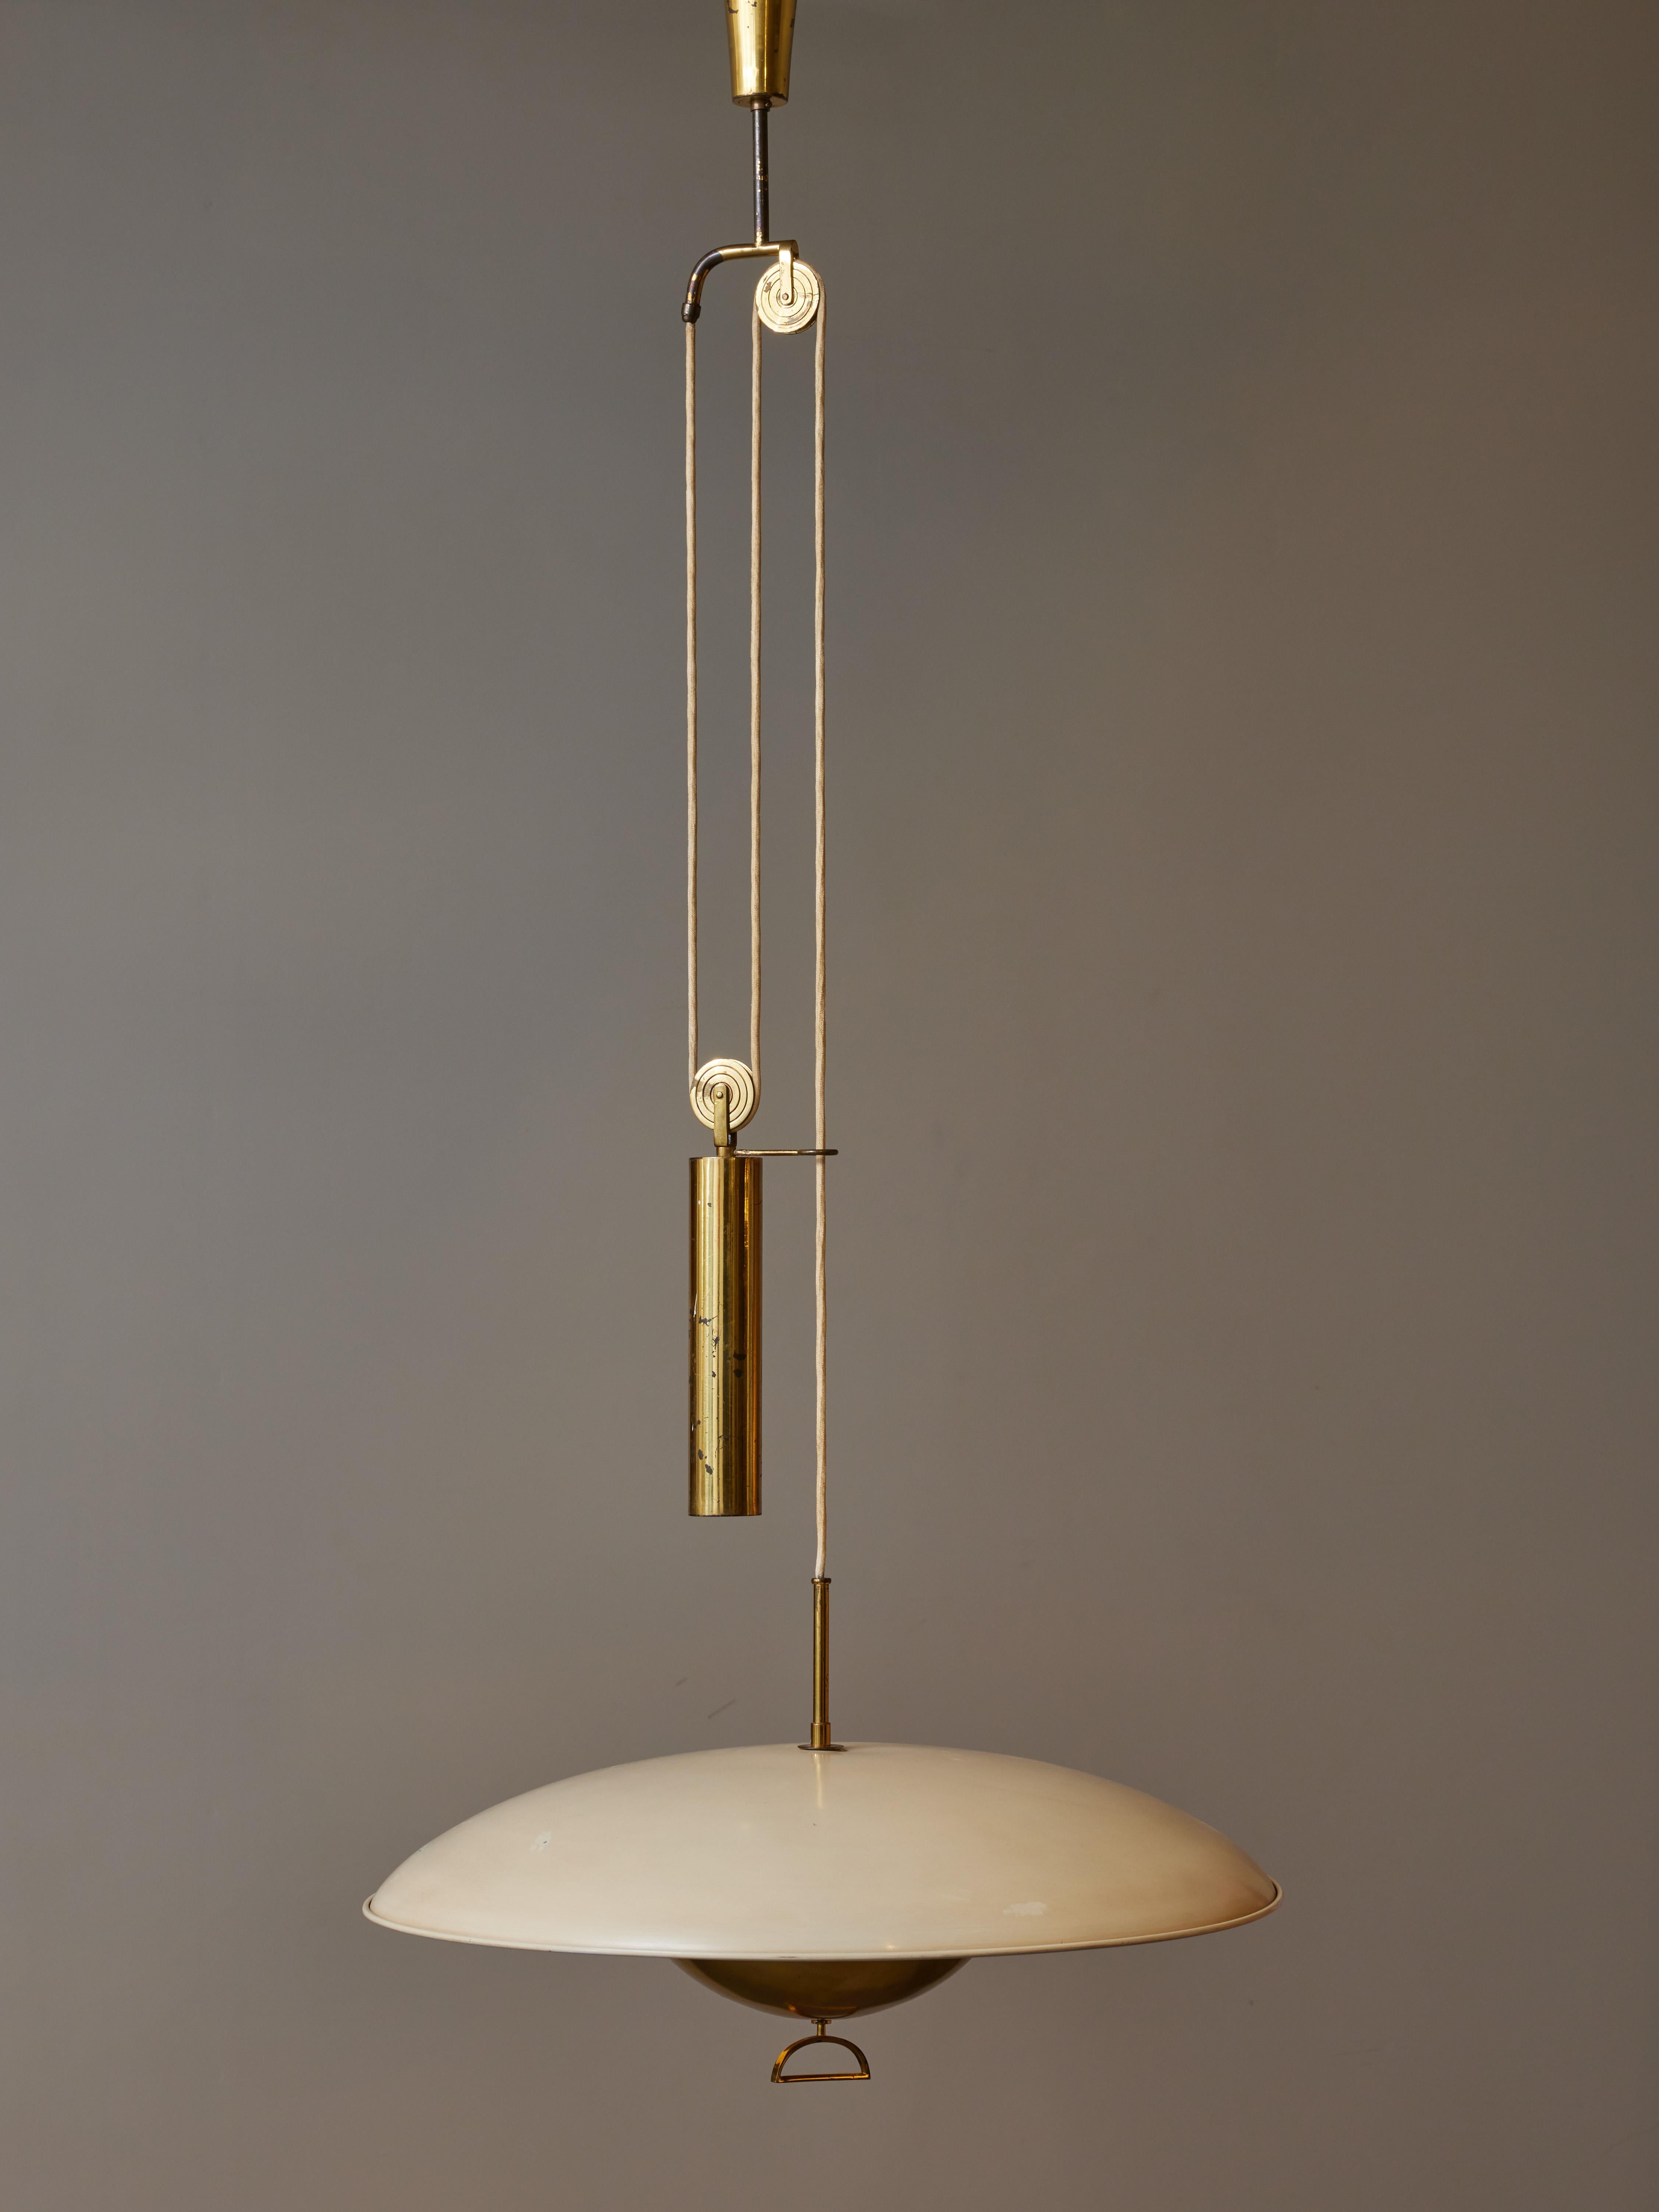 Decorative and ingenuine fixture made of an enameled metal shade with brass diffuser, hung by the wire which goes through different pulley and tubes allowing the fixture to be adjustable in height thanks to the counterweight.